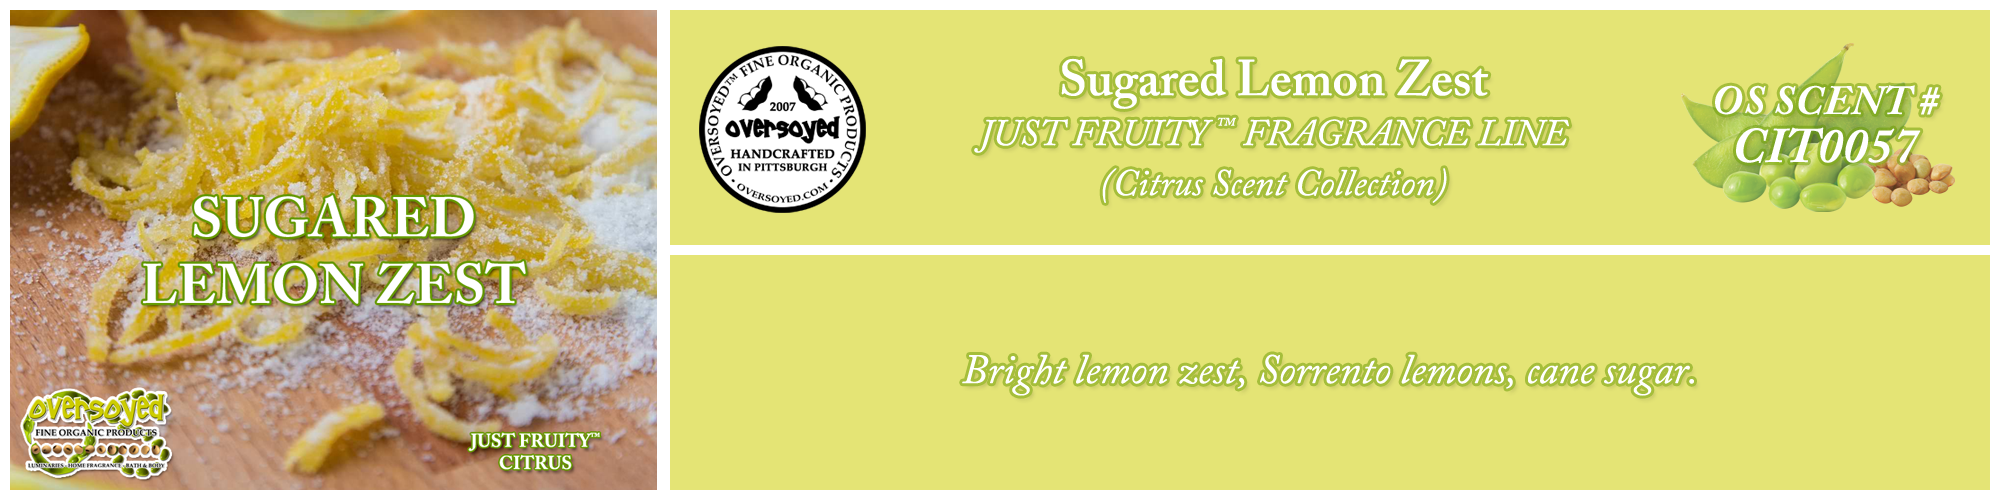 Sugared Lemon Zest Handcrafted Products Collection